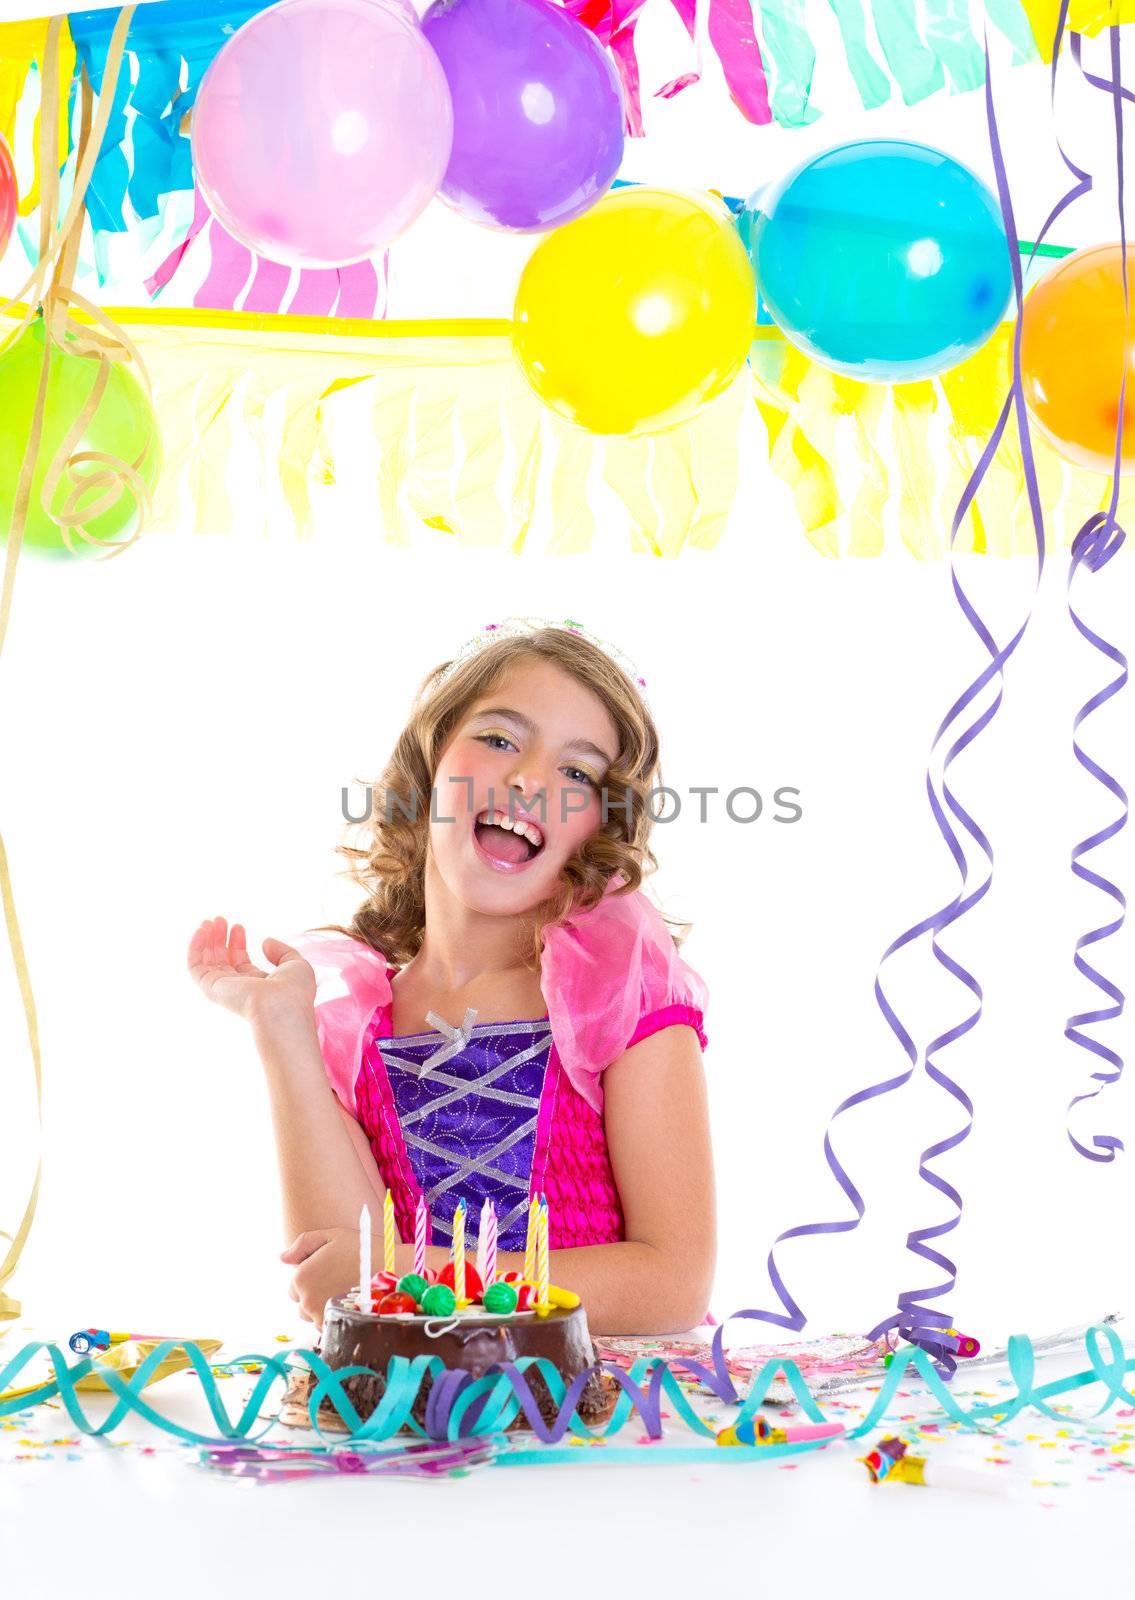 child kid crown princess in birthday party happy gesture and chocolate cake